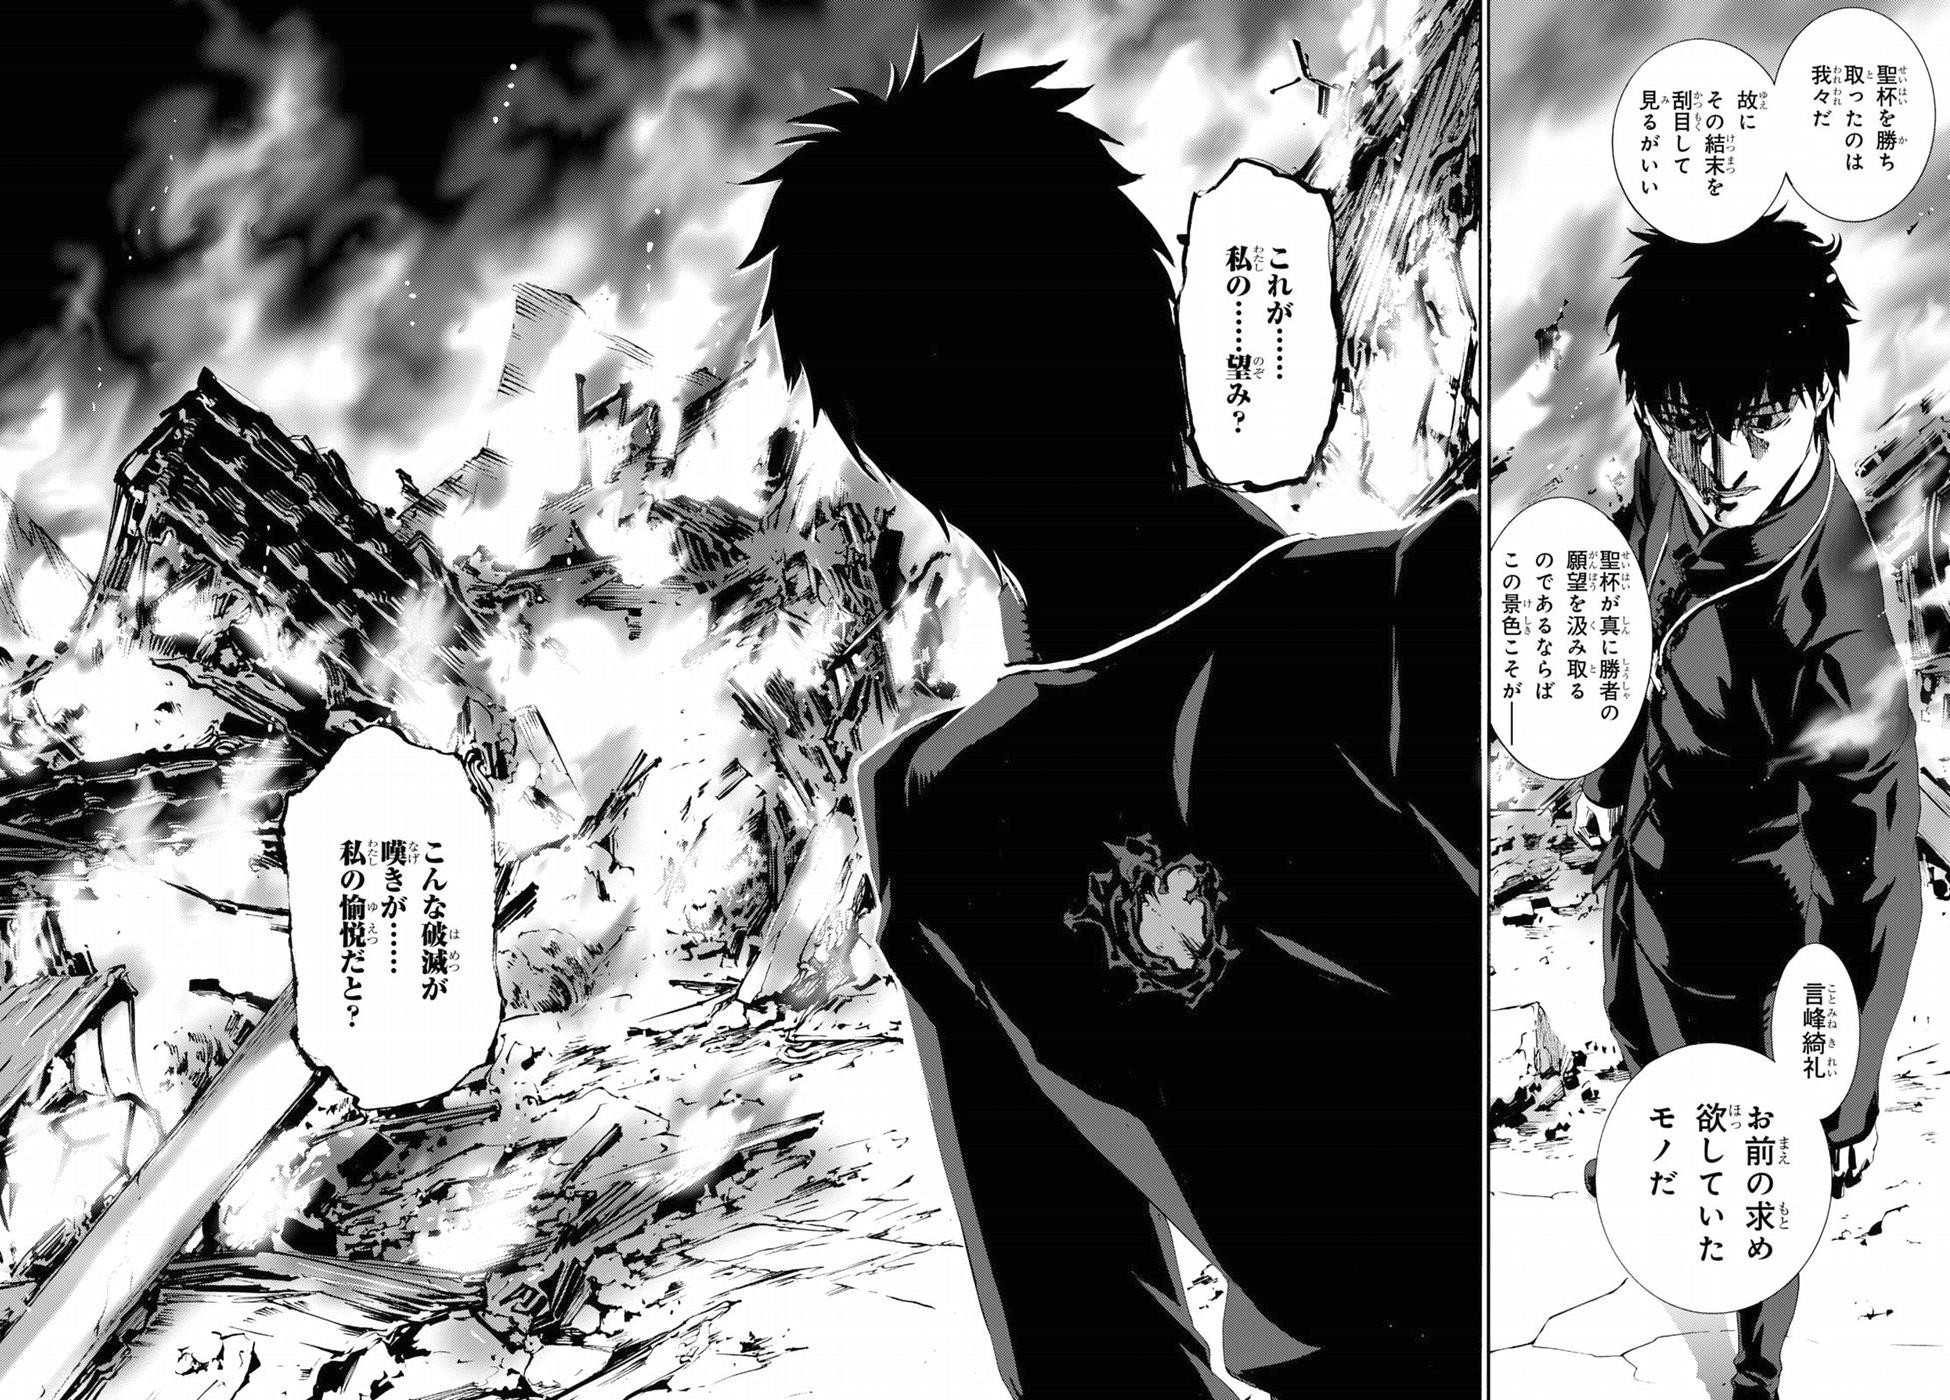 Fate Zero - Chapter 70 - Page 4